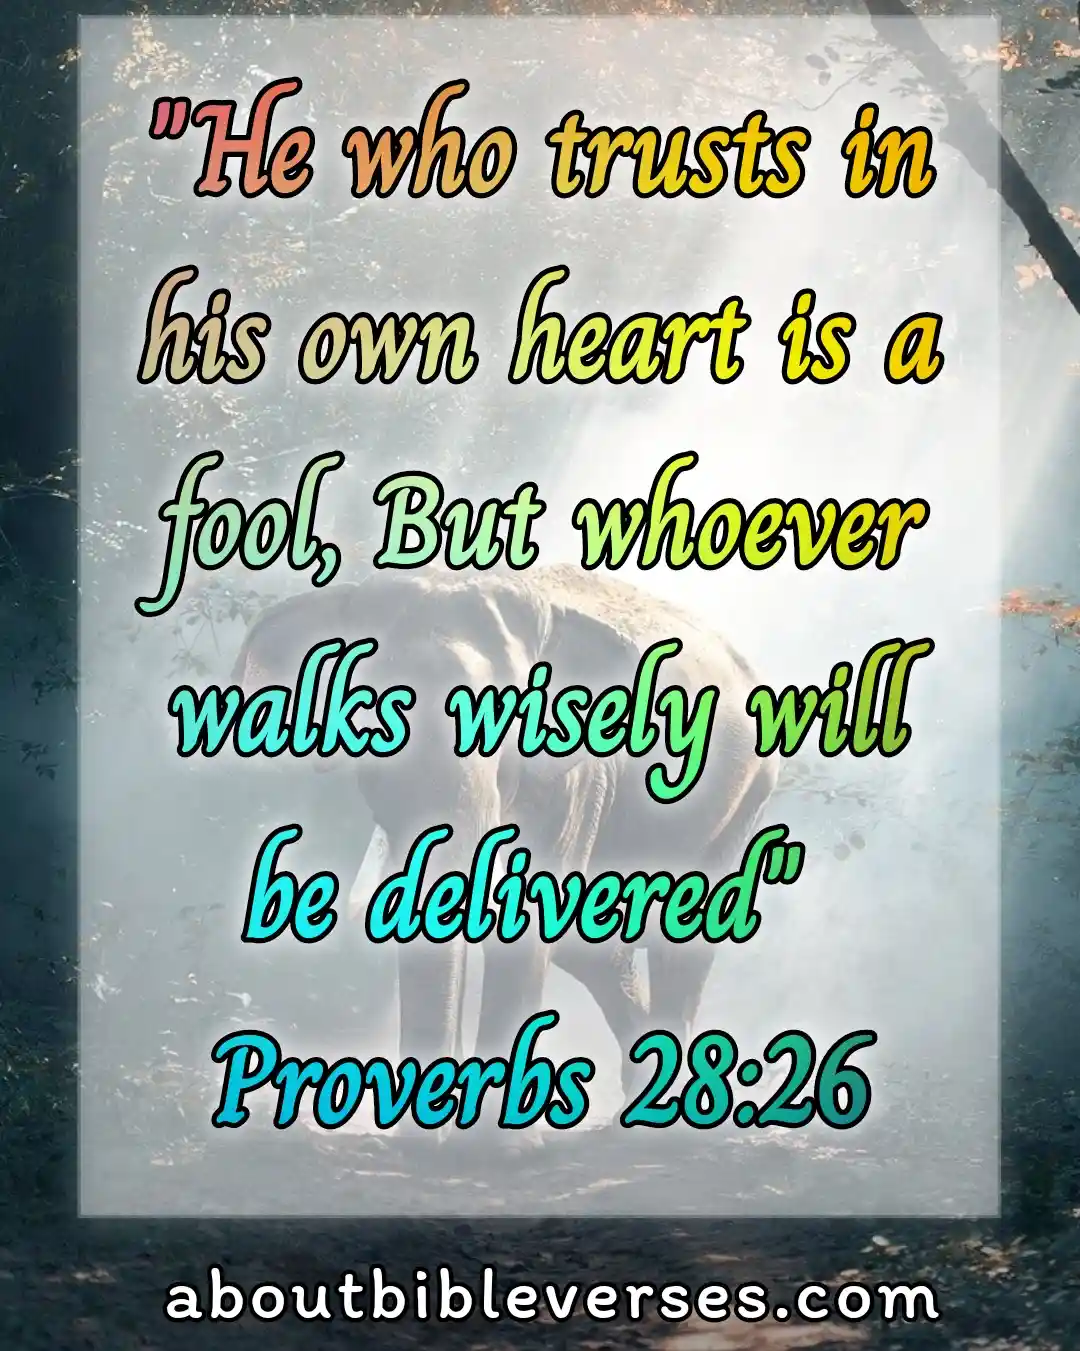 Bible Verses About Trusting Others (Proverbs 28:26)